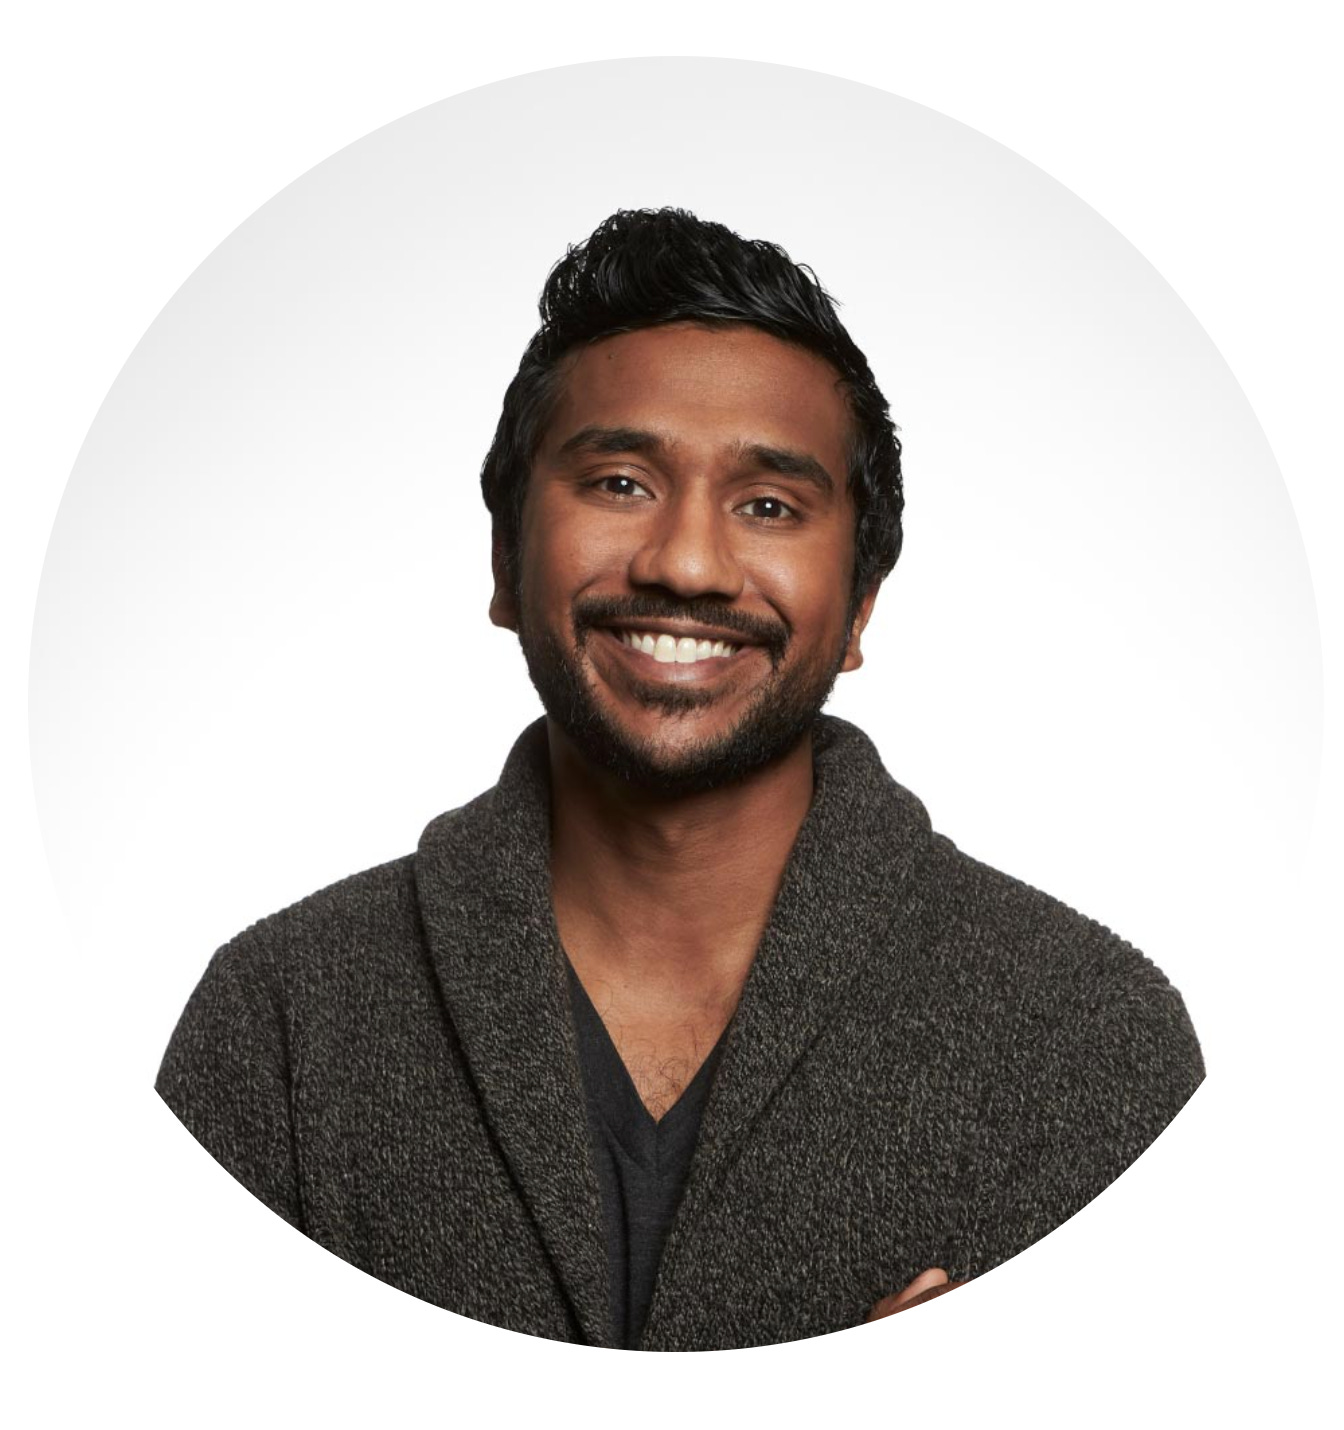 A photo of Ryan Panchadsaram, smiling broadly and wearing a charmingly cozy looking sweater.